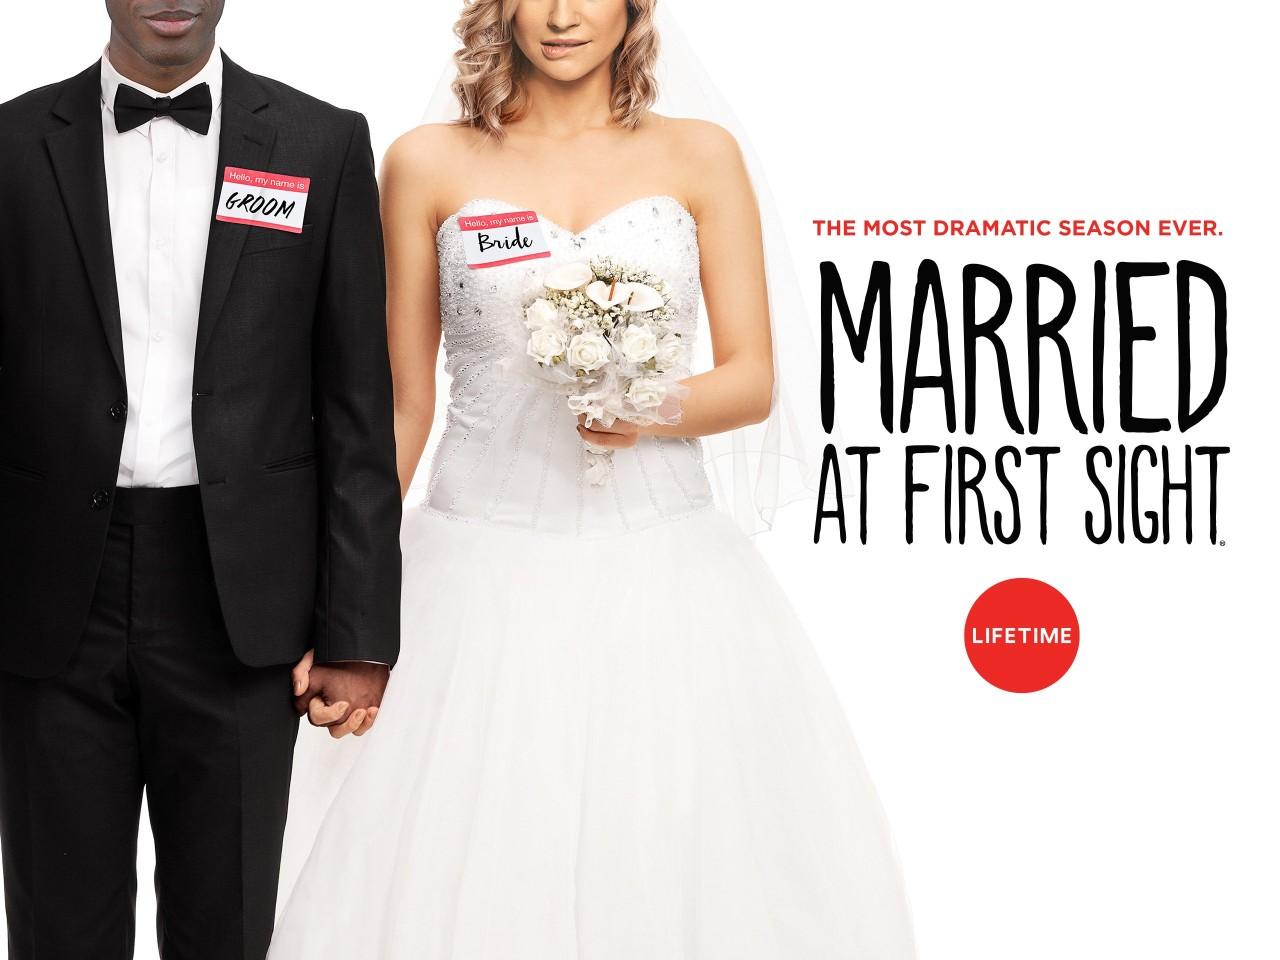 "Married at First Sight" Debuts in July // NextSeasonTV